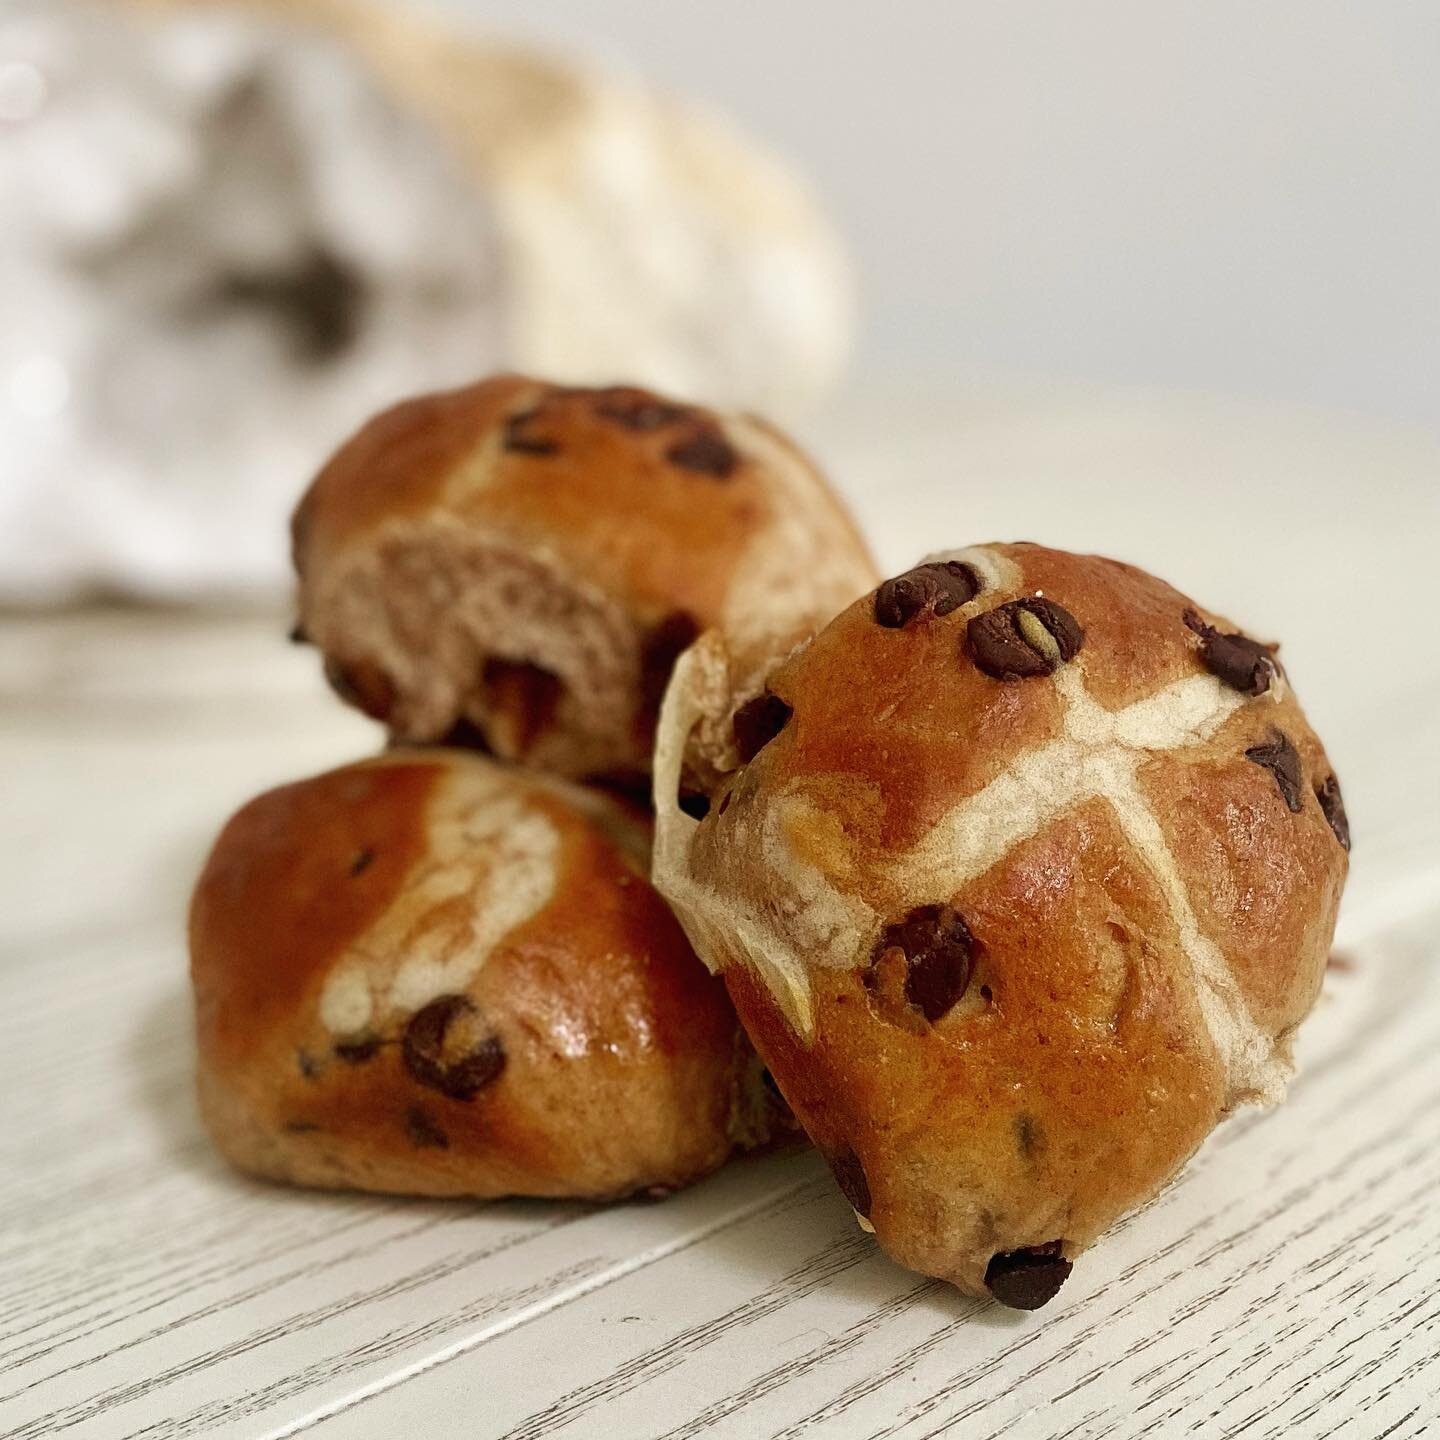 ➕ Hot Cross Buns ➕
.
We made hot cross buns this Easter while reminiscing about the symbolism of this practice
.
The obvious cross being the cross of crucifixion, the body of Christ the bread. The breaking of the bread to share food ~ symbolising com